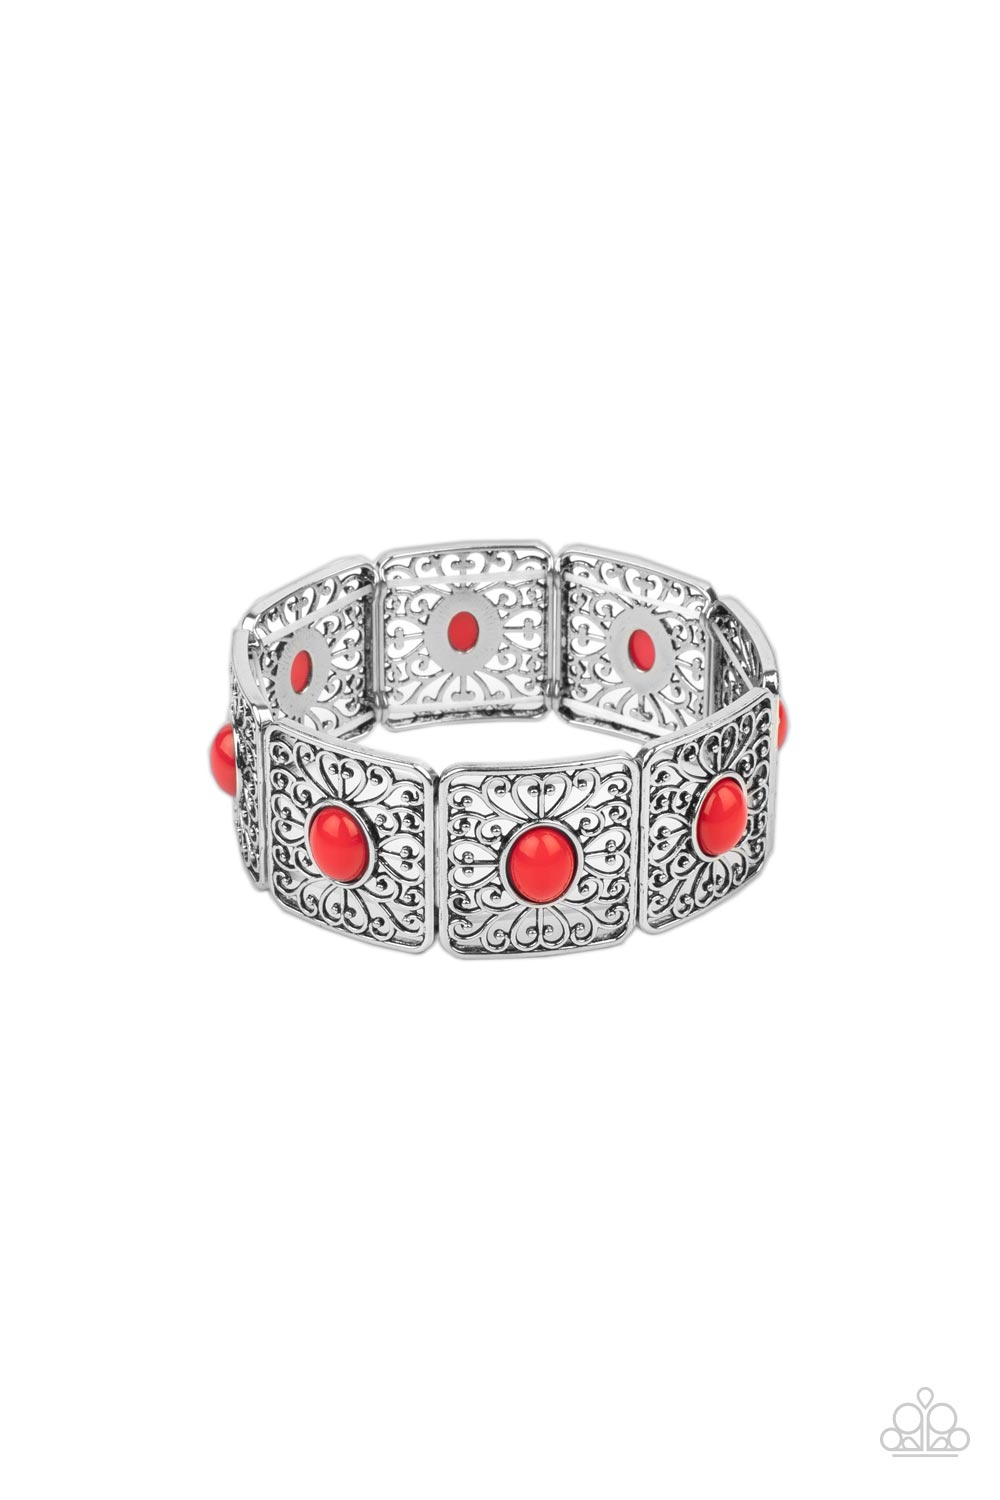 Cakewalk Dancing - Red & Silver Heart Shape Stretchy Bracelet - Paparazzi Accessories